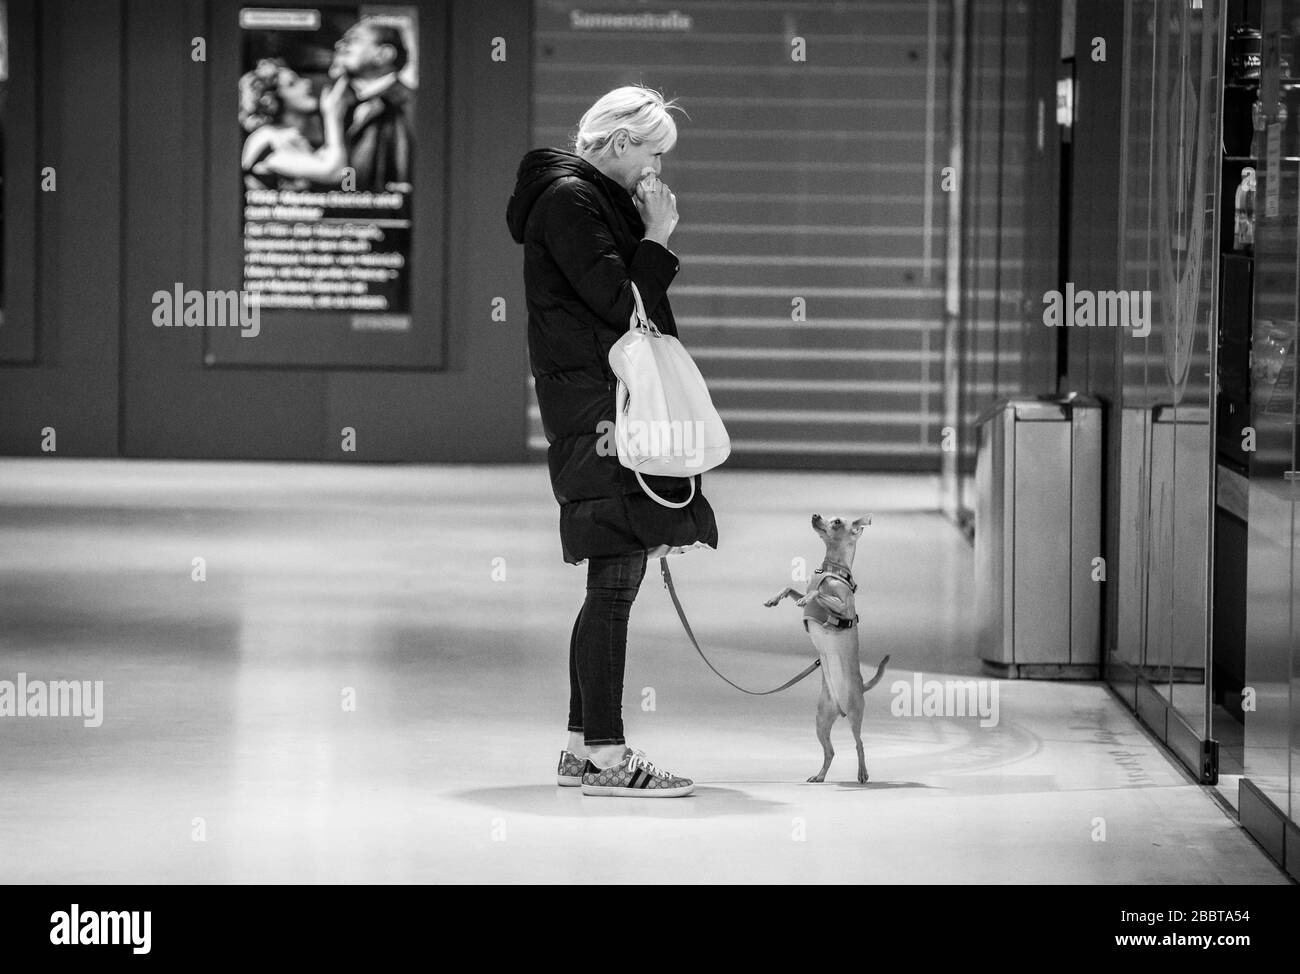 Munich, Bavaria, Germany. 1st Apr, 2020. A dog stands up and begs hoping its owner will give it food. Scenes of normalcy like this are far and few in the era of the Coronavirus lockdowns. Despite being cautiously optimistic regarding the efforts to flatten the curve, Parts of Germany, such as Bavaria, have announced extensions to the daily life restrictions at least until April and with certain portions extending beyond. Credit: Sachelle Babbar/ZUMA Wire/Alamy Live News Stock Photo